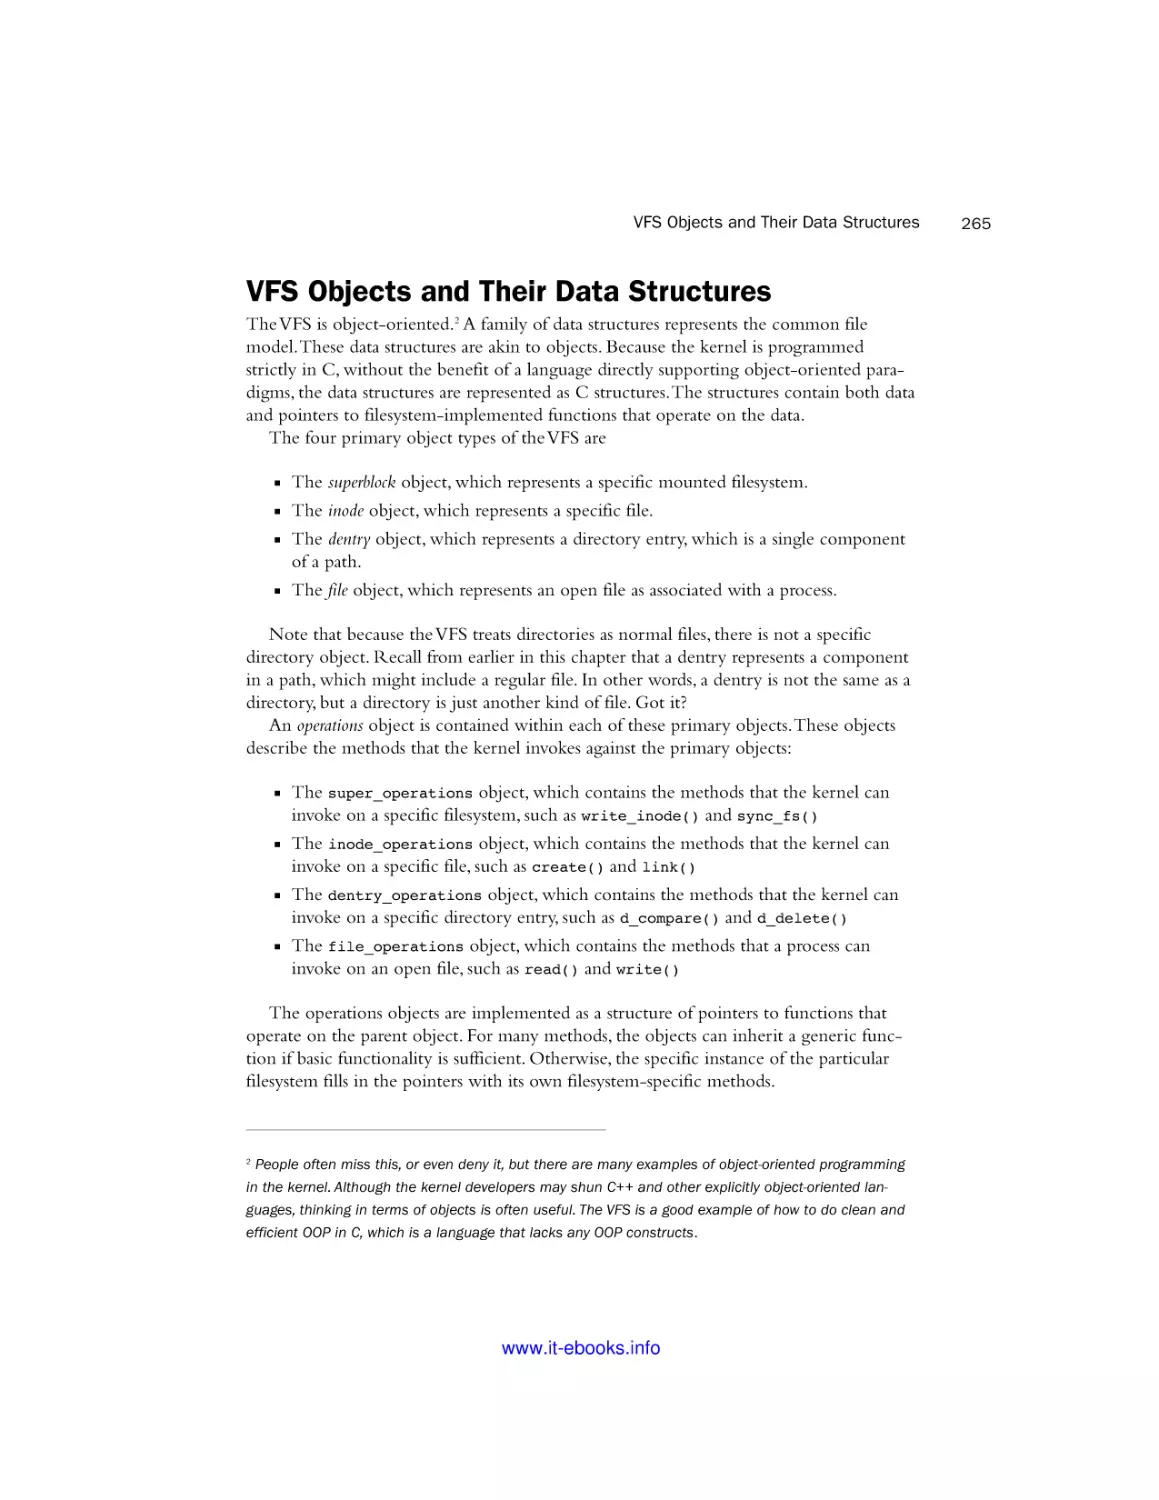 VFS Objects and Their Data Structures